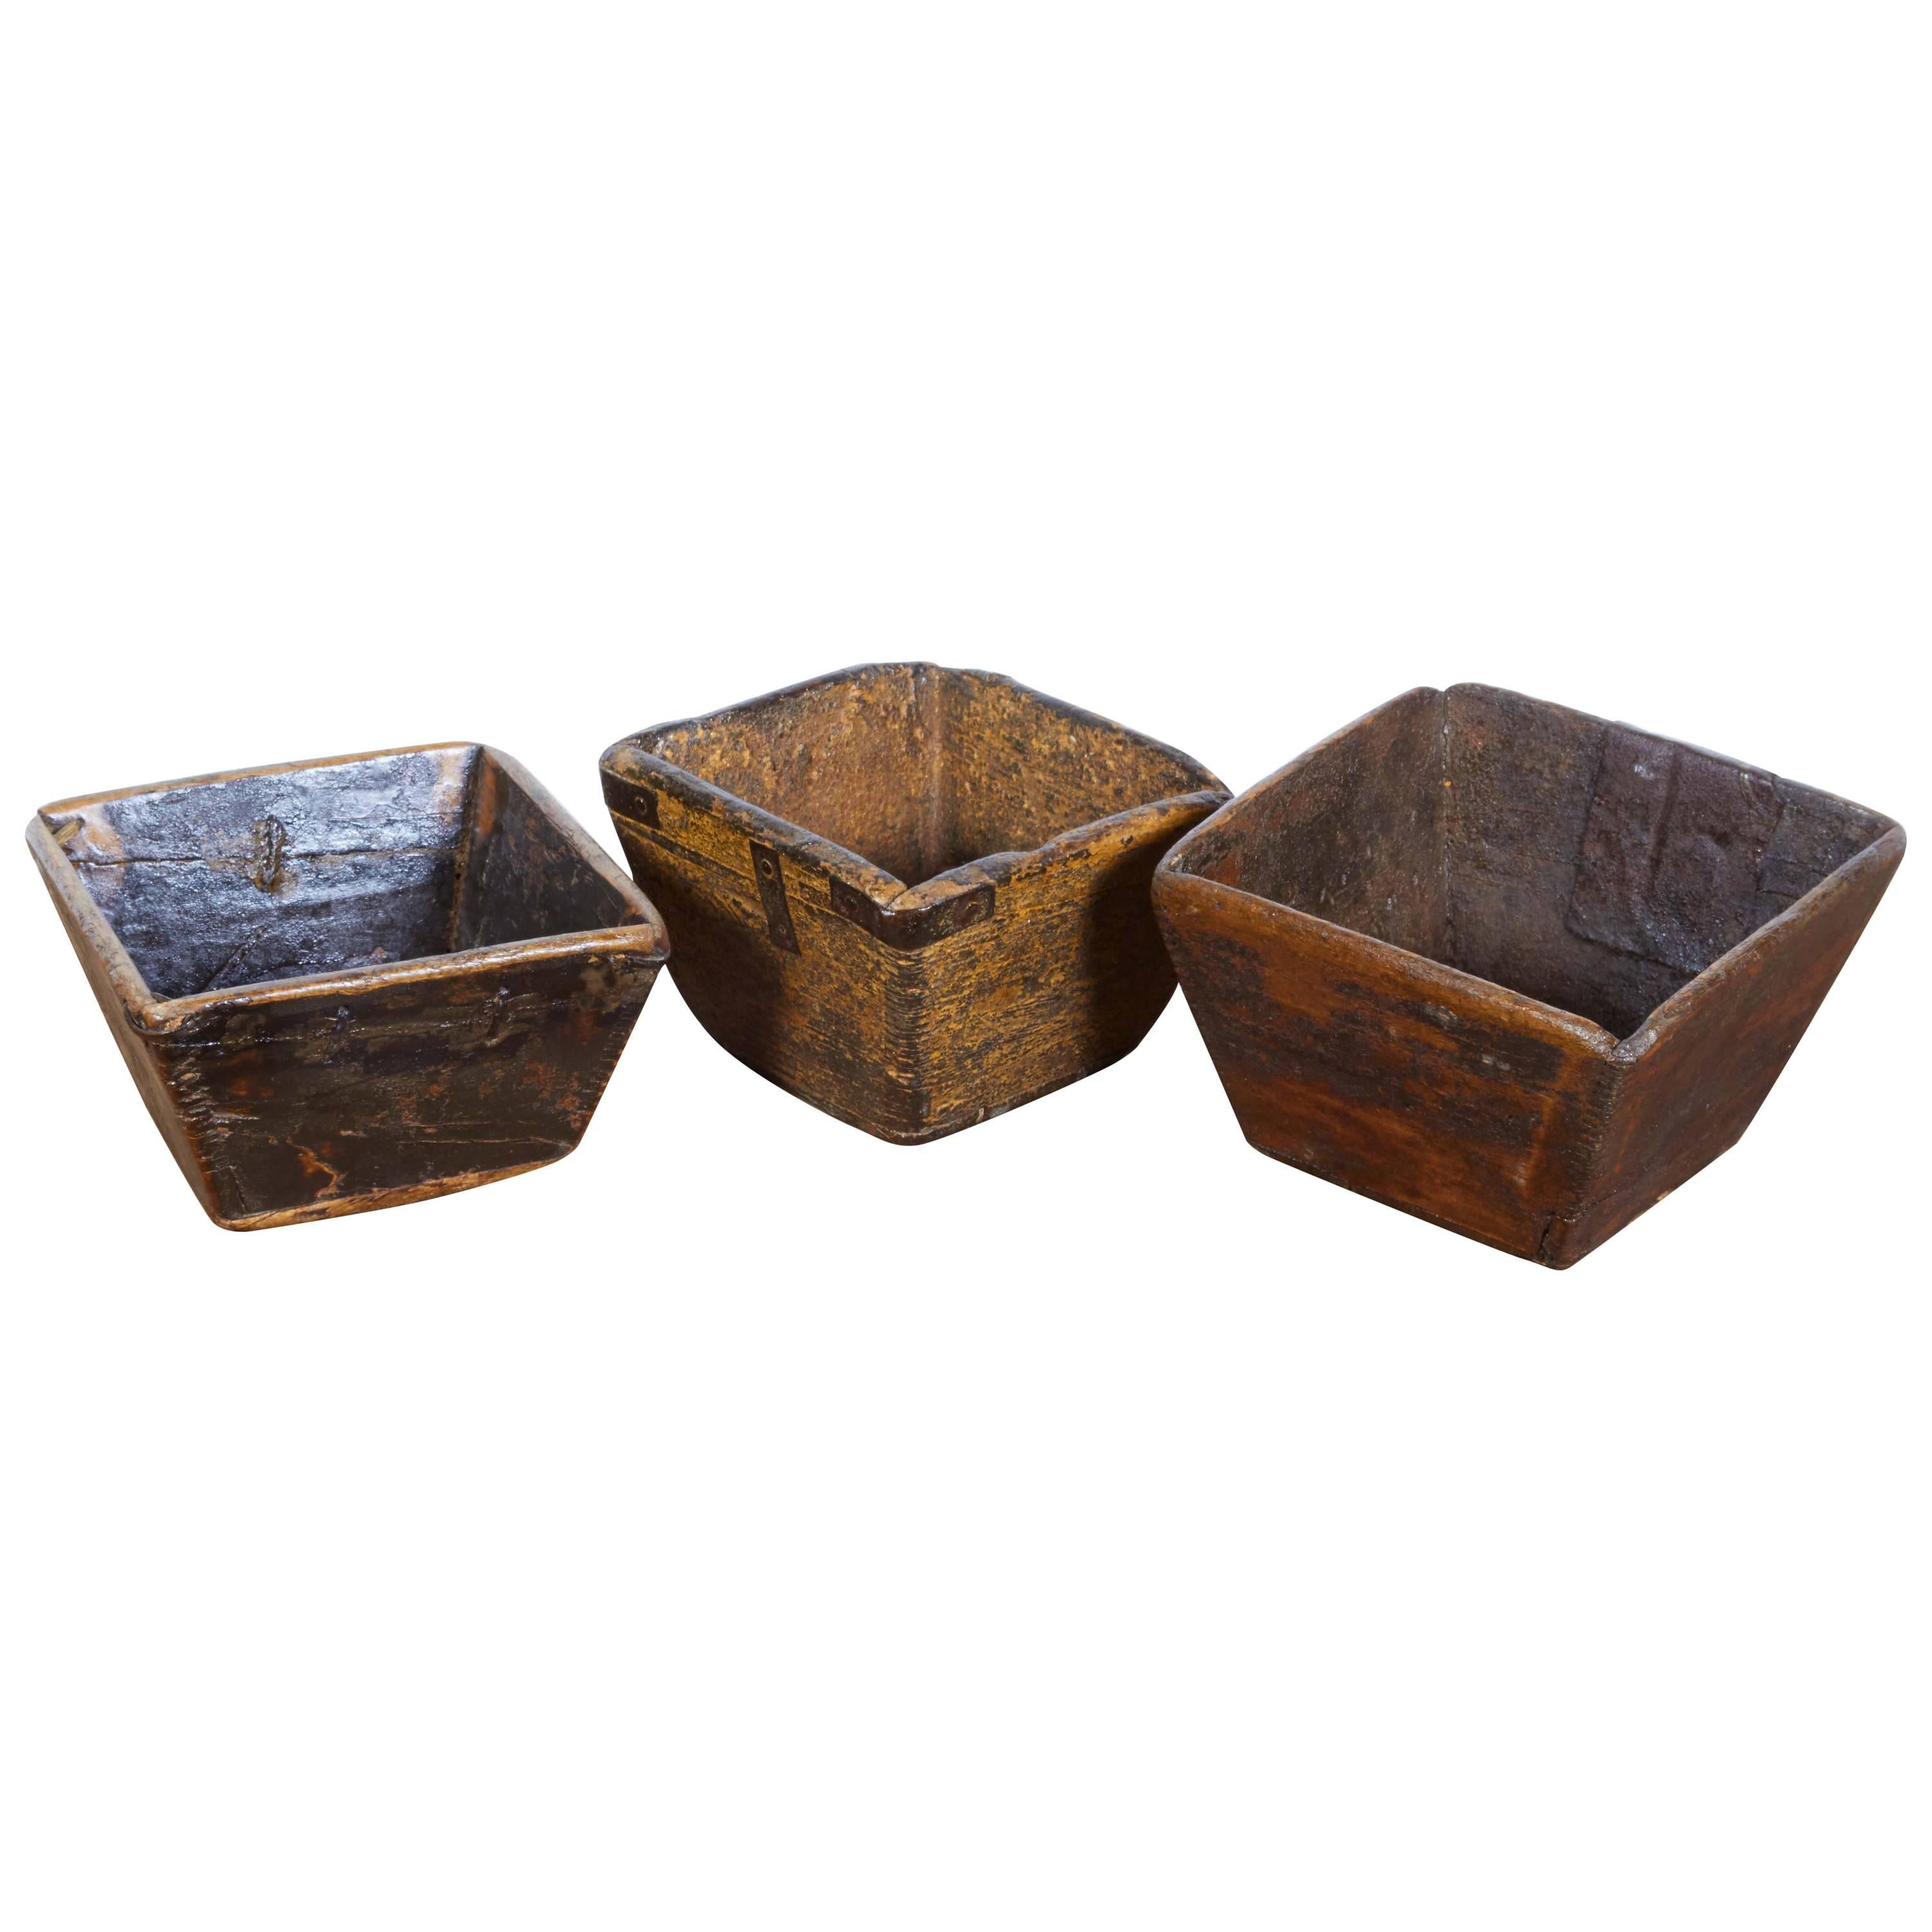 Collection of Small Nicely Worn Antique Grain Measure Baskets